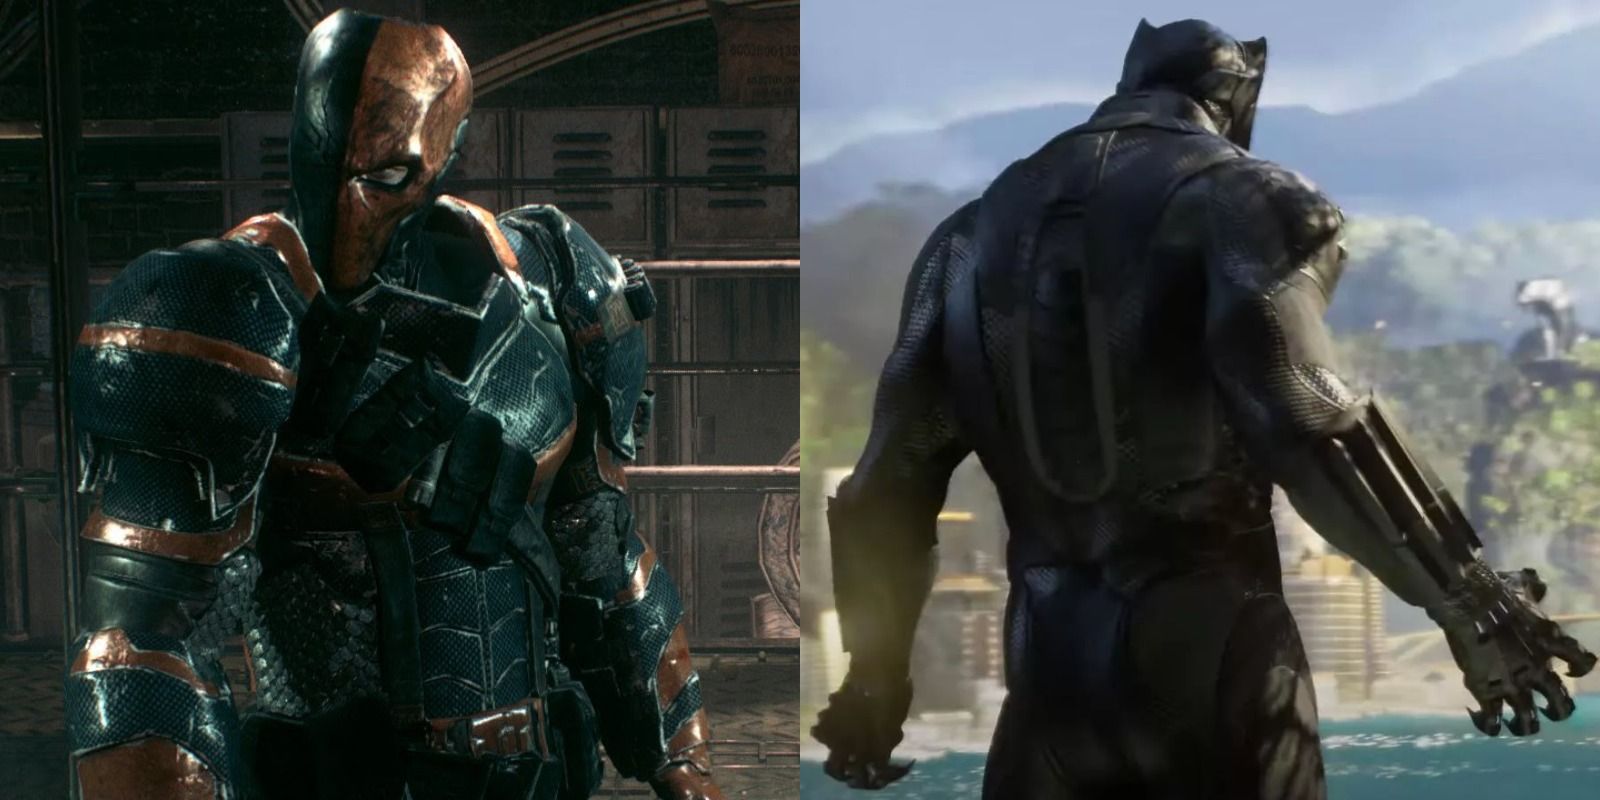 Arkham Knight's Deathstoke and Black Panther from Marvel's Avengers